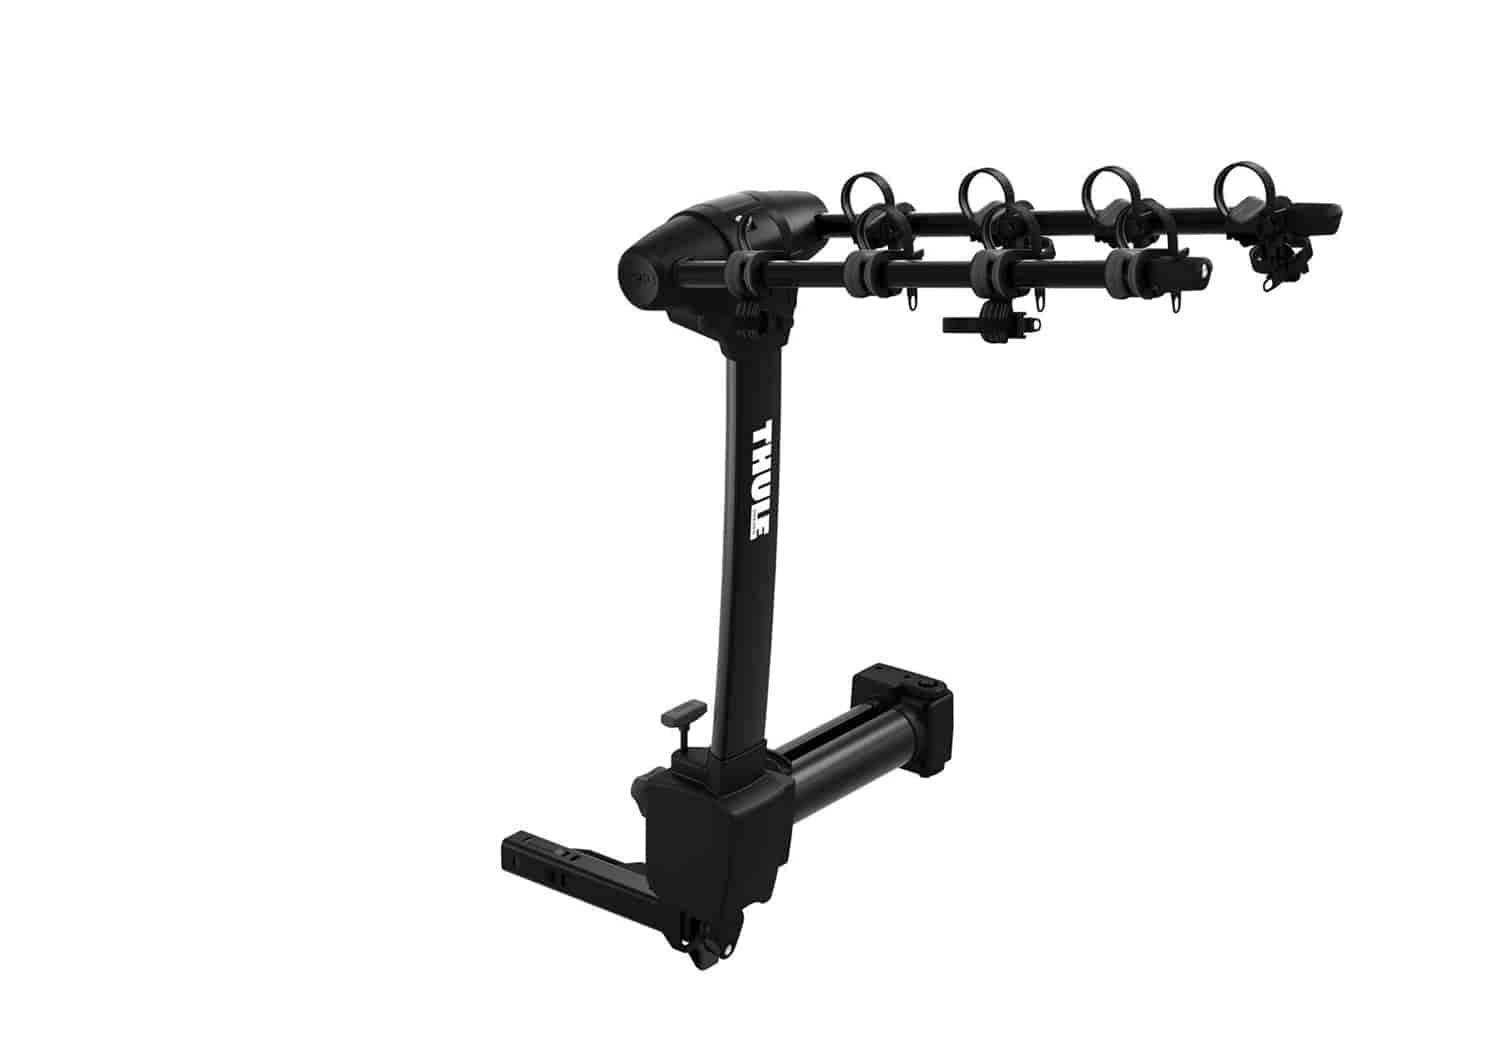 Apex XT 4 Swing Hitch-Mount Hanging Bike Rack Carrier for 4 Bicycles